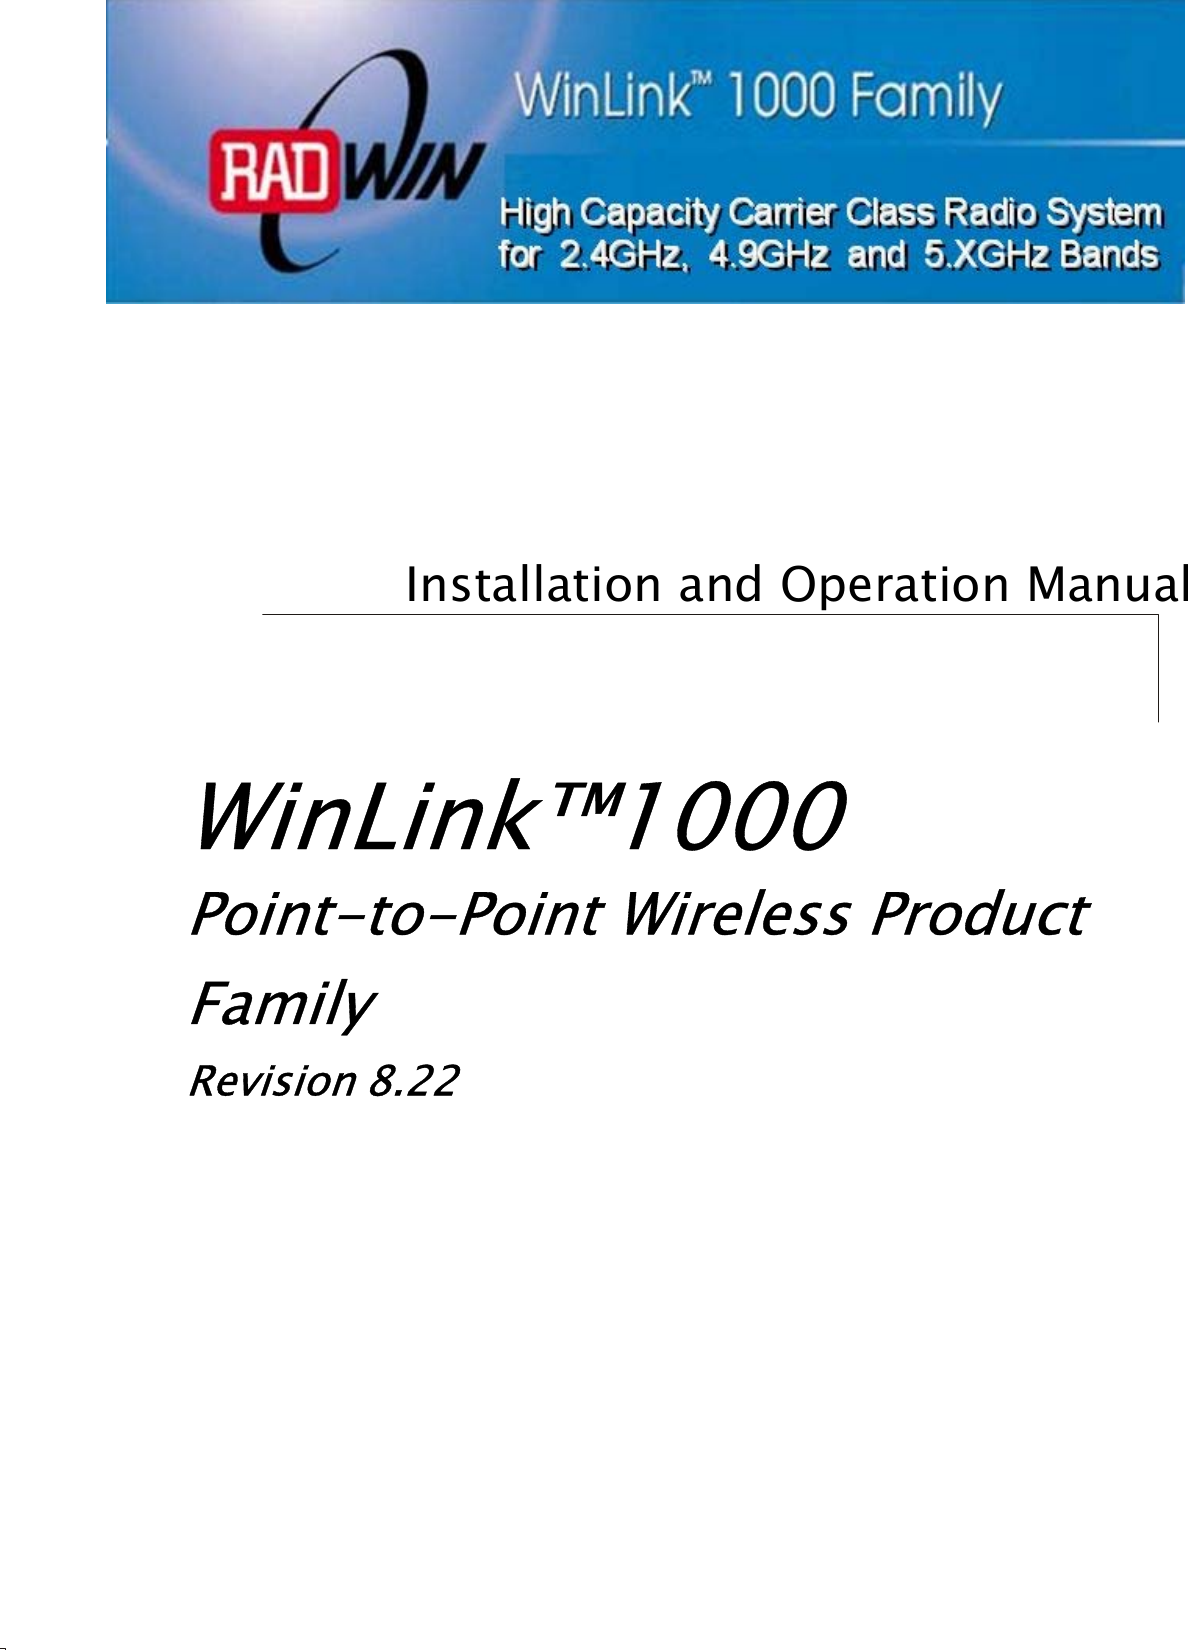 Installation and Operation Manual WinLink™1000Point-to-Point Wireless Product Family Revision 8.22  